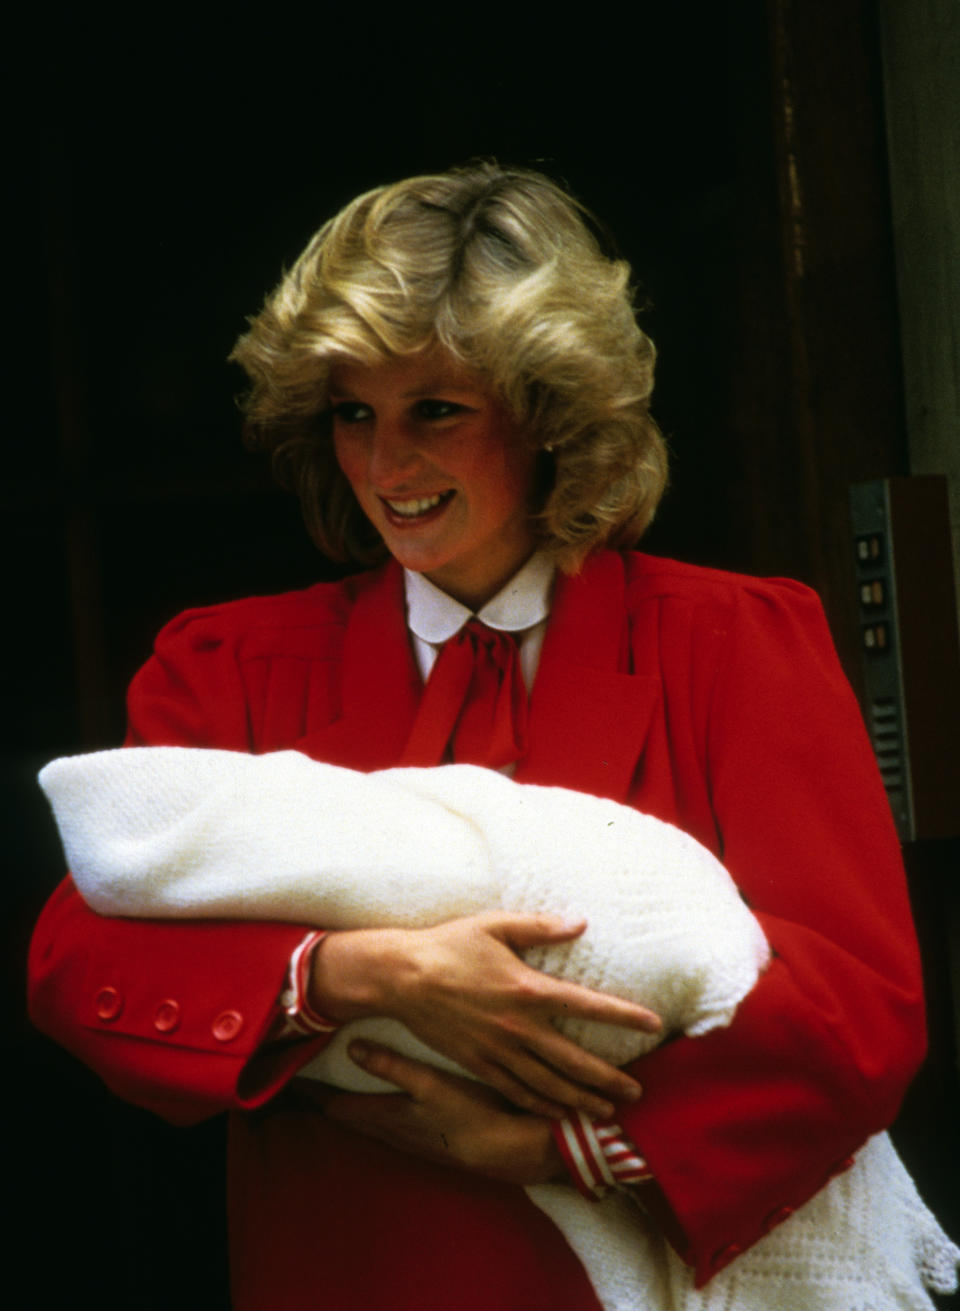 Only a year after her royal wedding to Charles, Diana became a mom